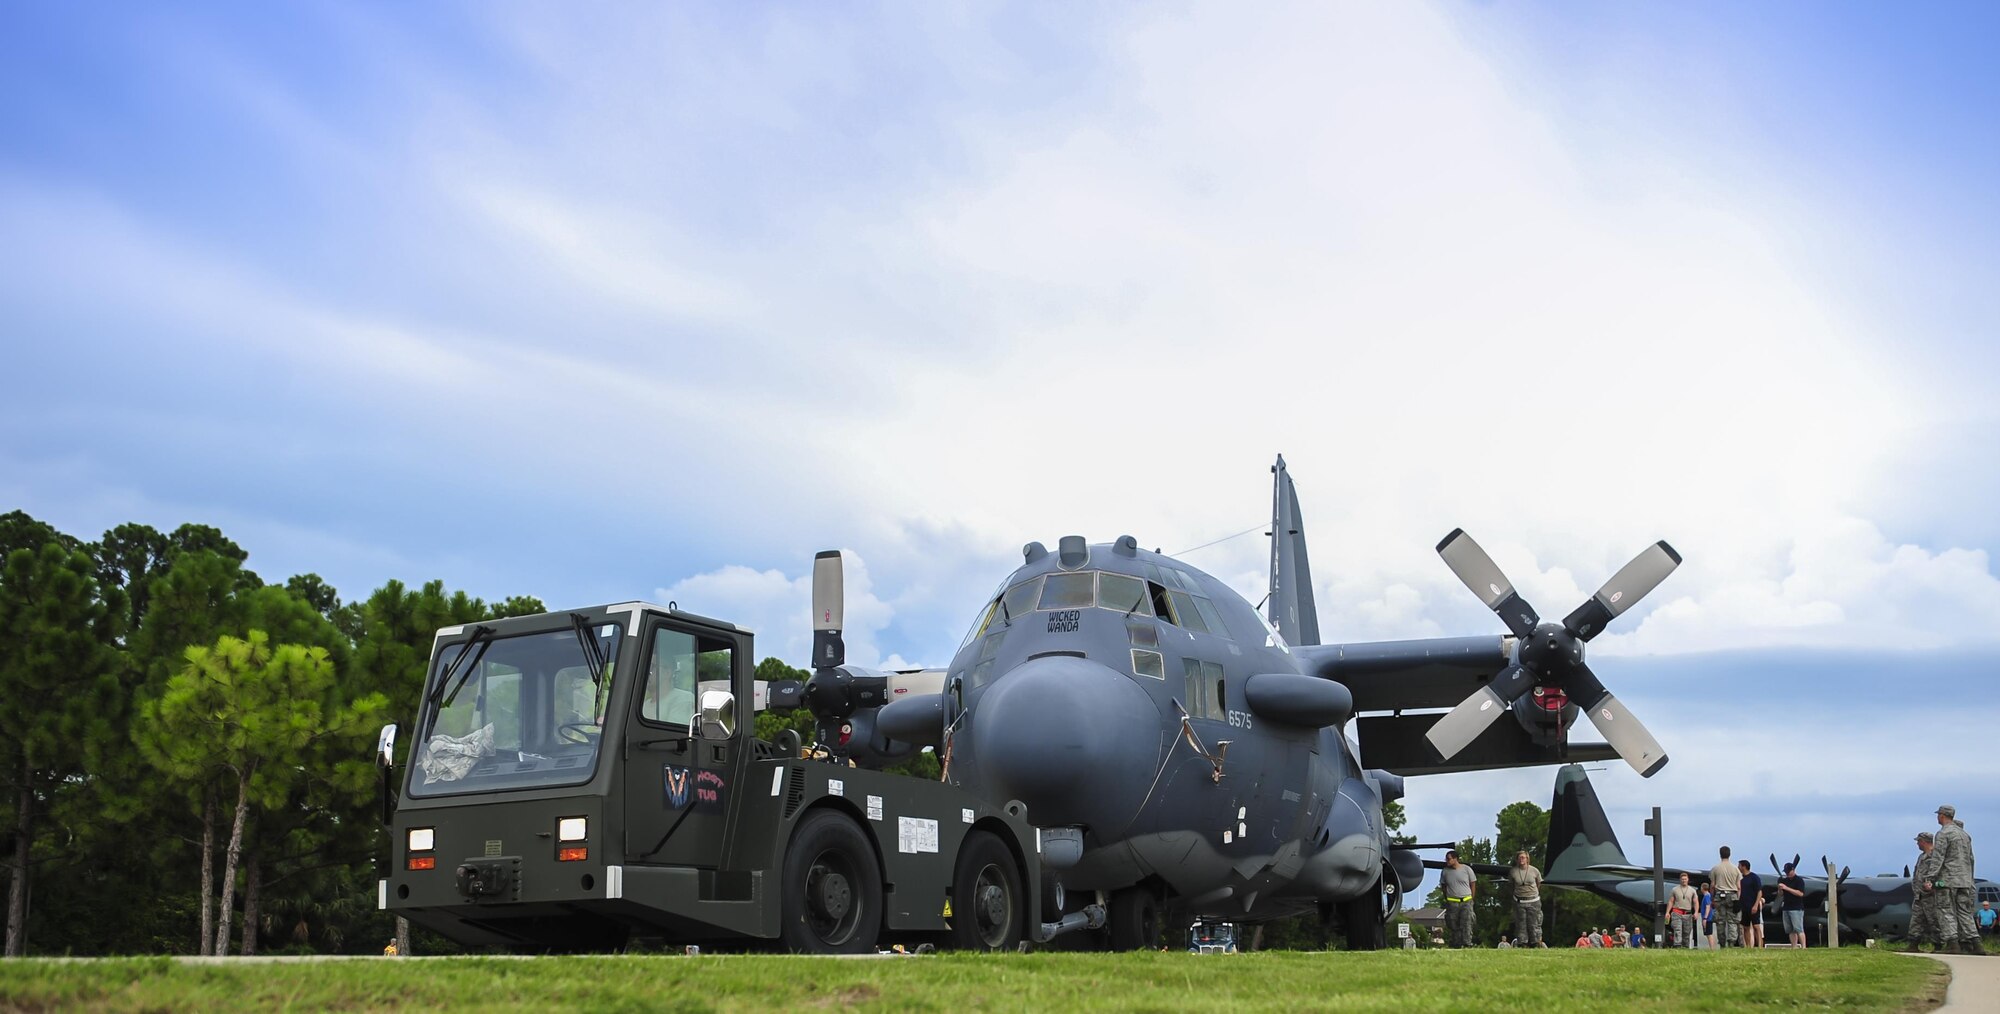 Airmen with the 1st Special Operations Aircraft Maintenance squadron tow an AC-130H Spectre down Independence Road on Hurlburt Field, Fla., Aug. 15, 2015. The Spectre was towed from the flightline and staged for installation in to the Hurlburt Field Air Park. The AC-130H fleet retired May 26, 2015, after more than 45 years of service. The installation process for this aircraft, known as “Wicked Wanda,” is set to be complete by Aug. 28, 2015. (U.S. Air Force photo by Senior Airman Meagan Schutter/Released)